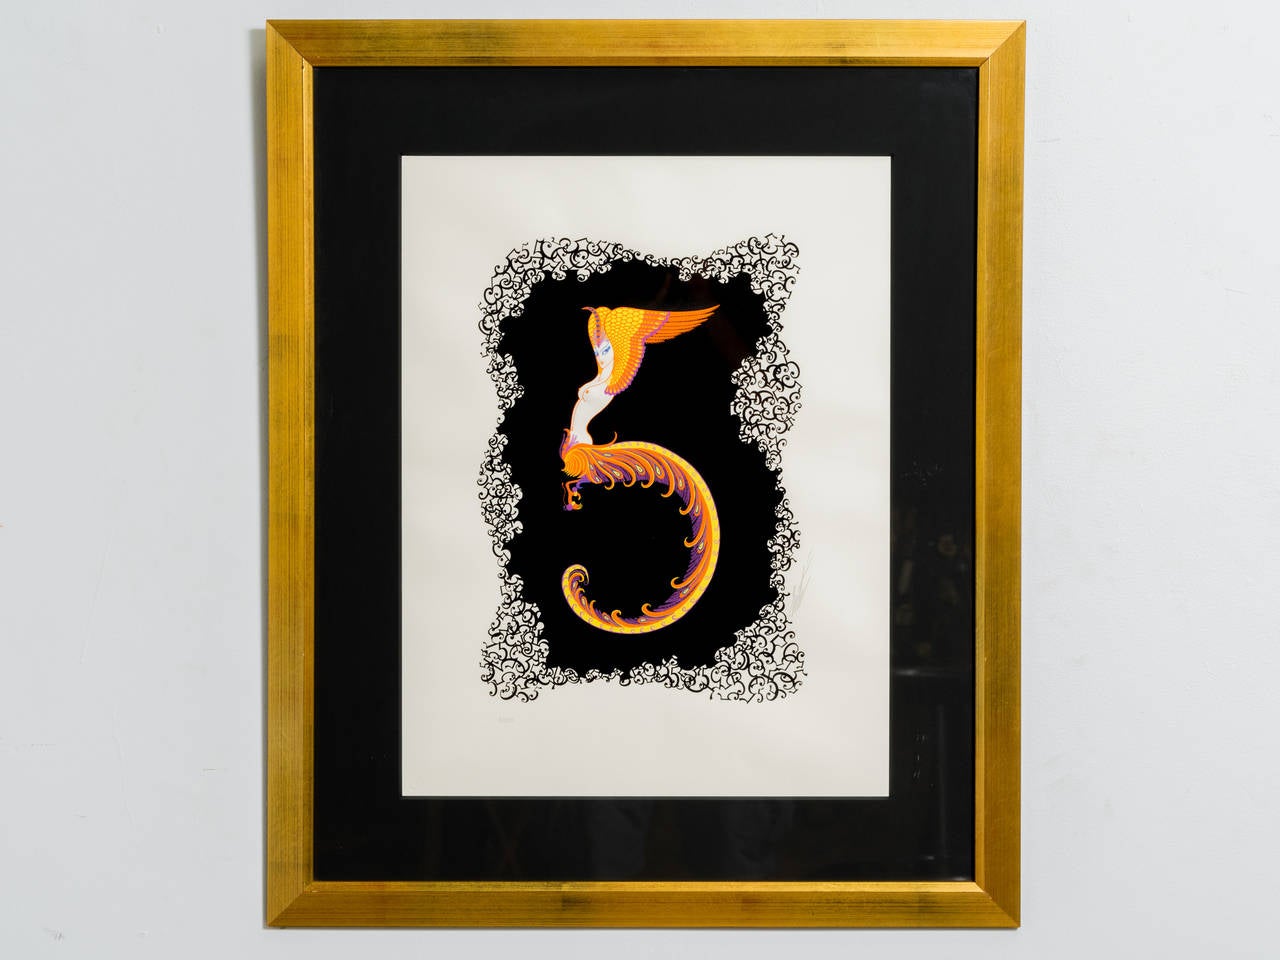 The Number 5
Featuring  a central embossed, winged female figure. Signed at right and numbered"7/350" bottom left pencil. Framed under glass.
Sight: 22"H x 16 3/4"W 
Frame: 31 1/4"H x 26"W